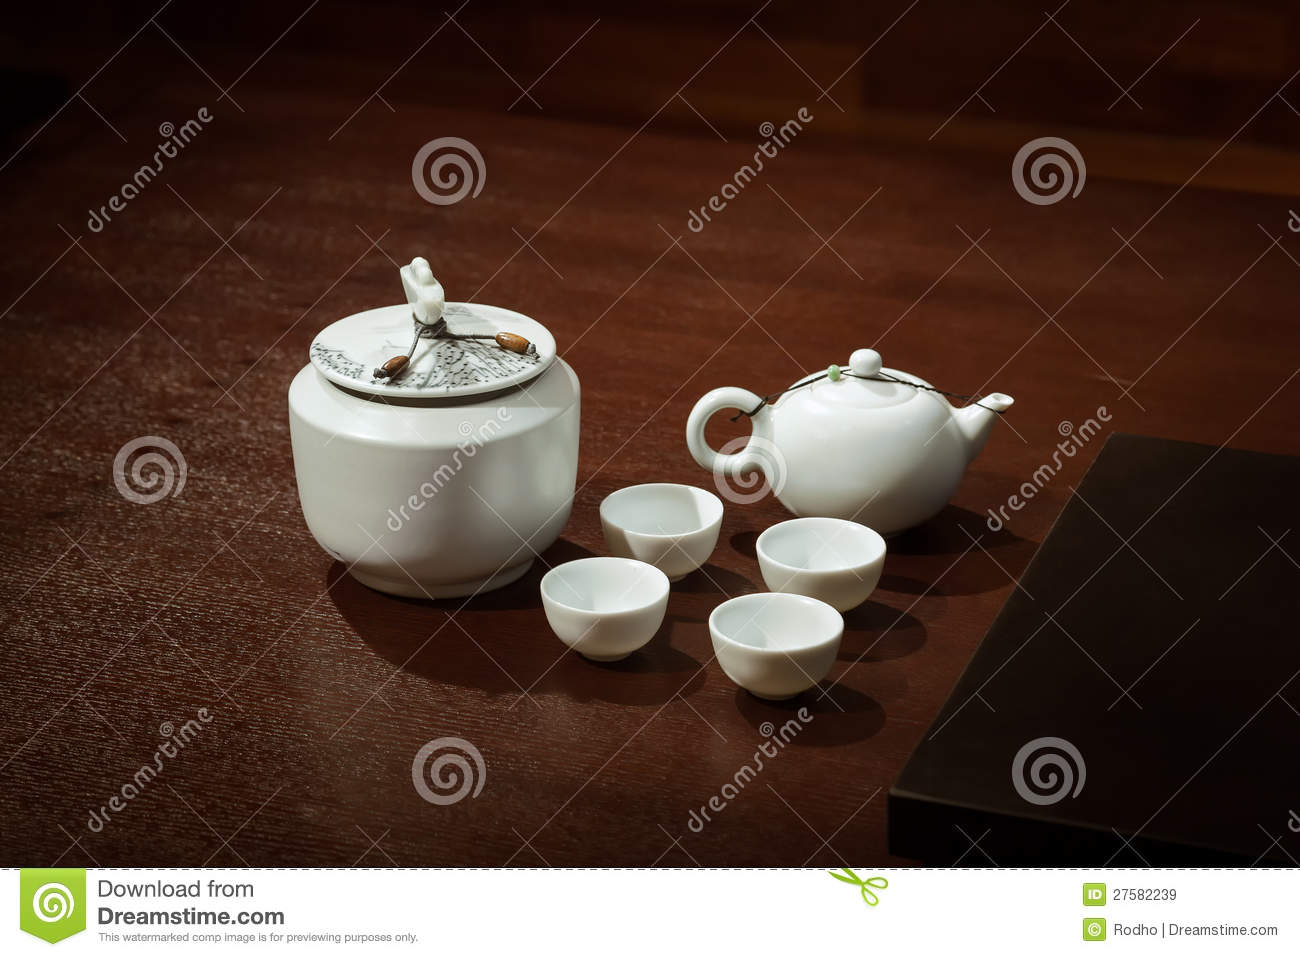 Traditional Asian Tea Set On A Wooden Table Royalty Free Stock Images    